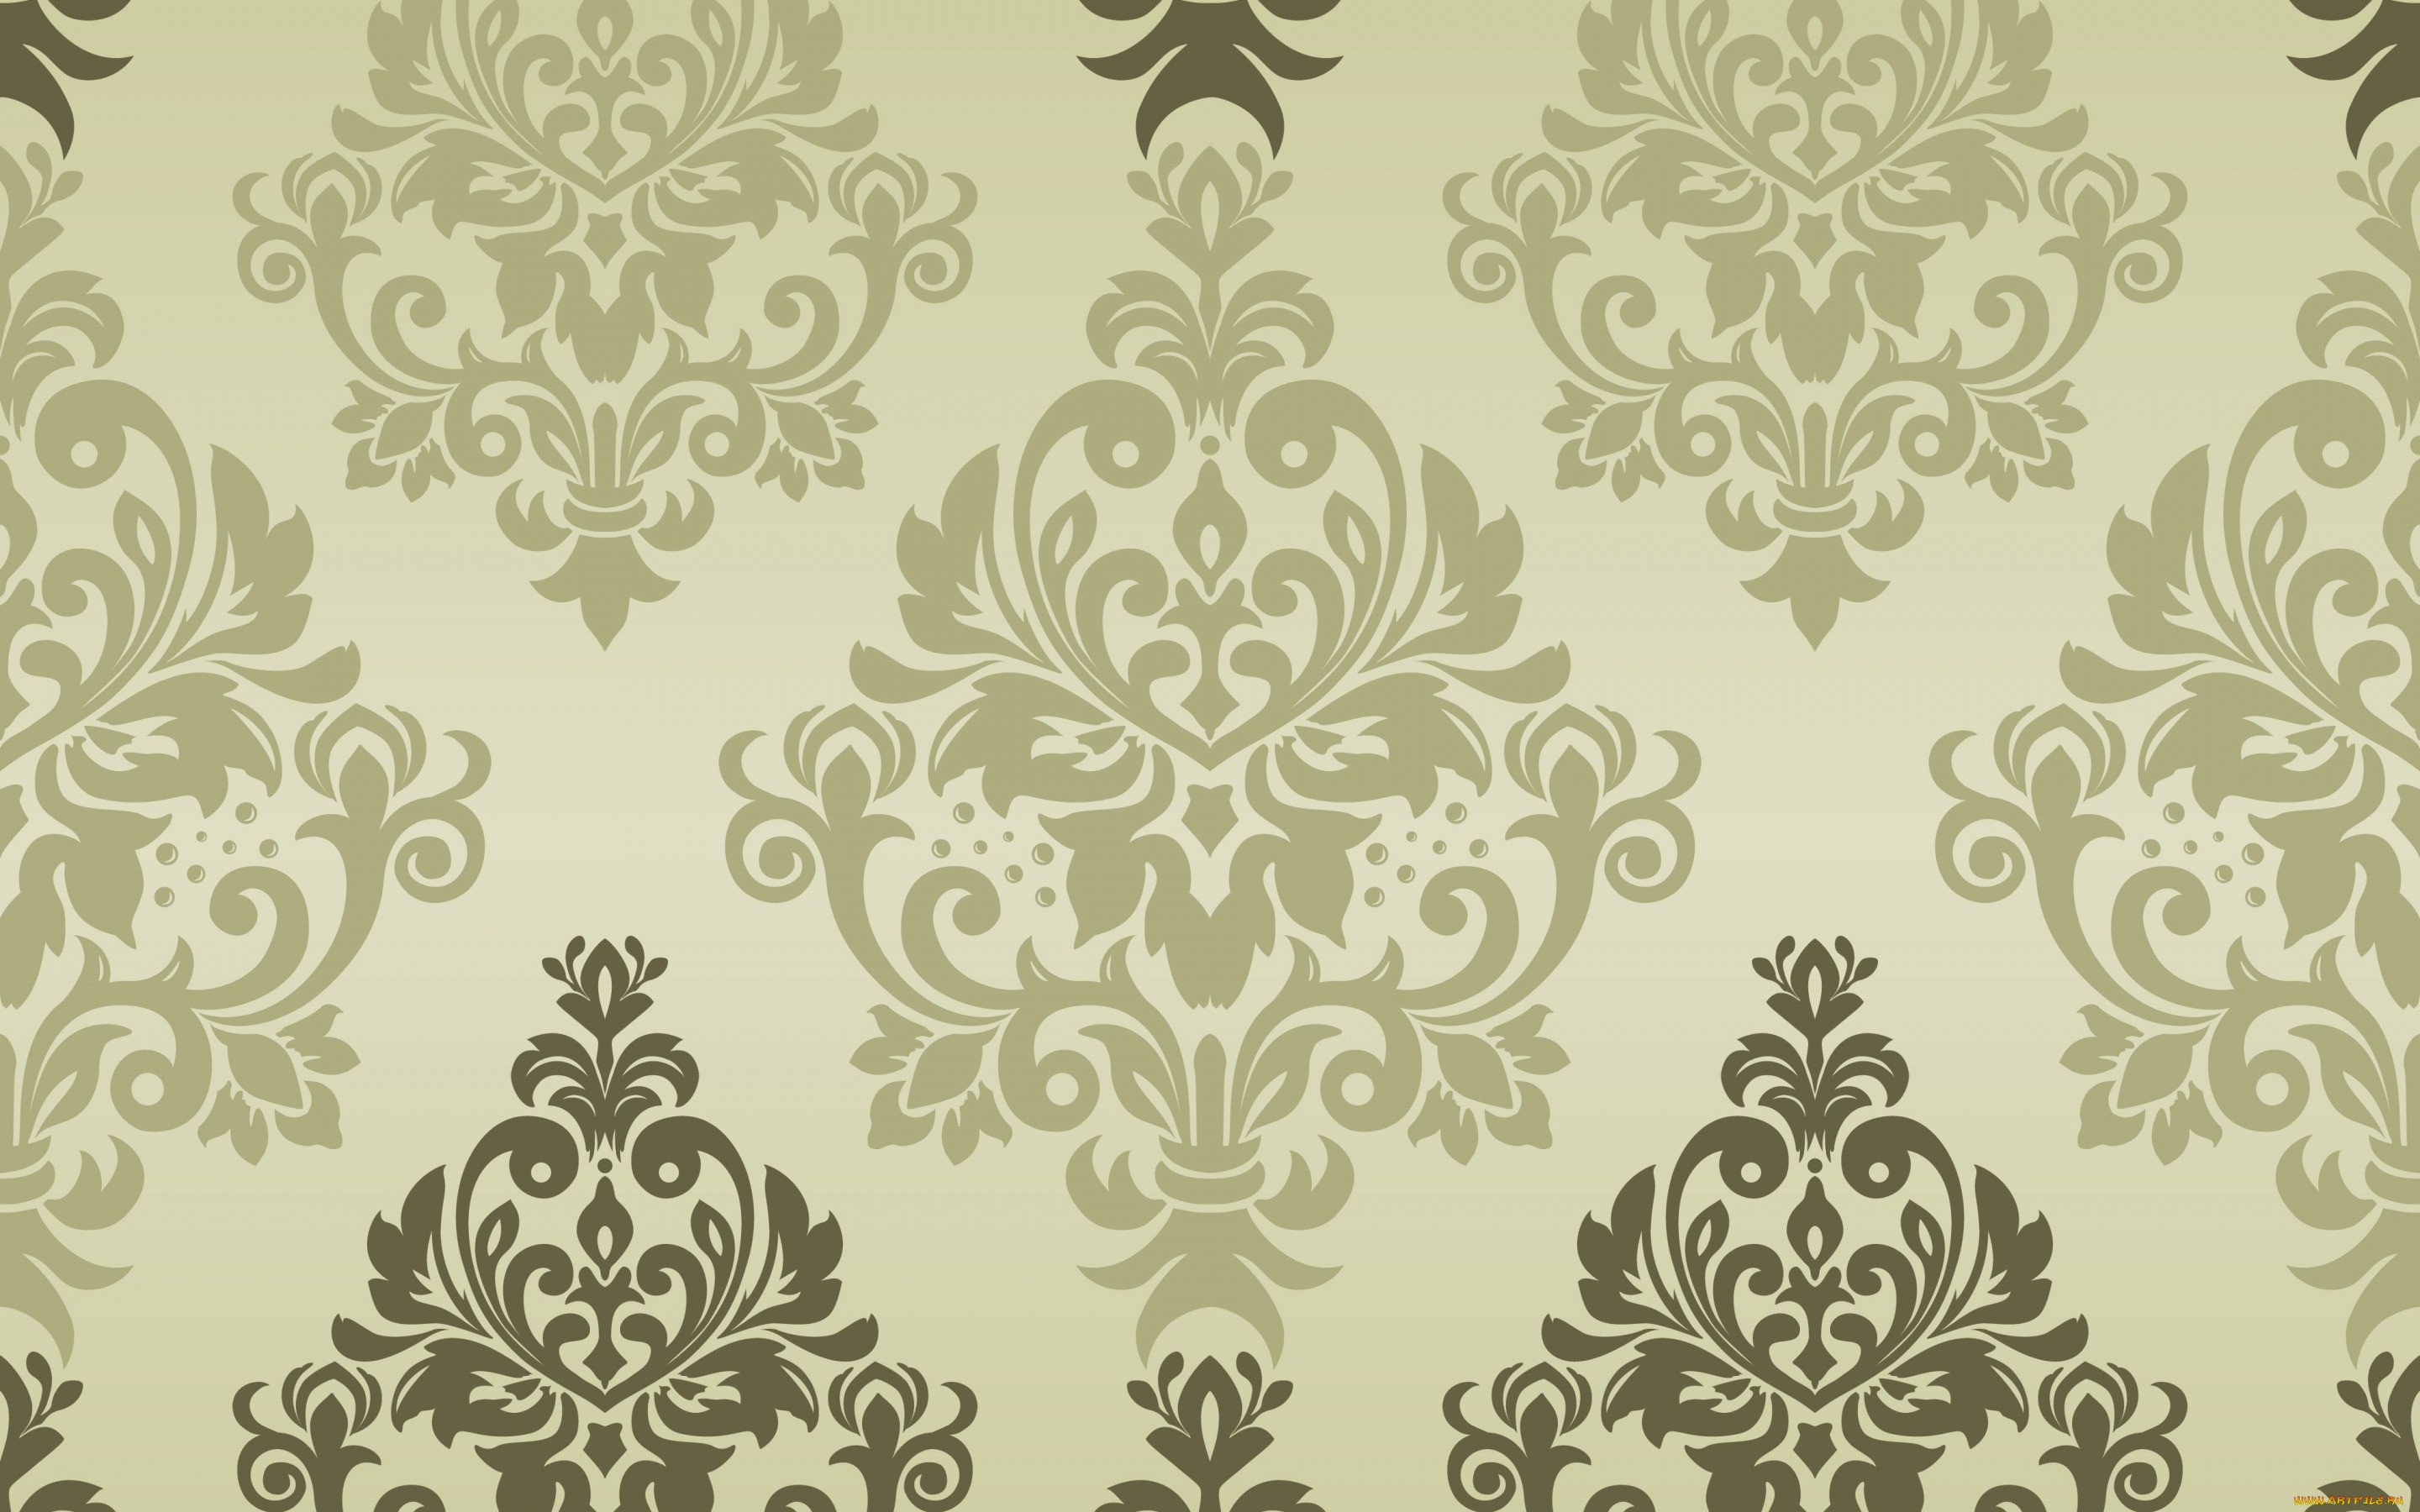  , - , graphics, , , pattern, background, classic, seamless, damask, , vector